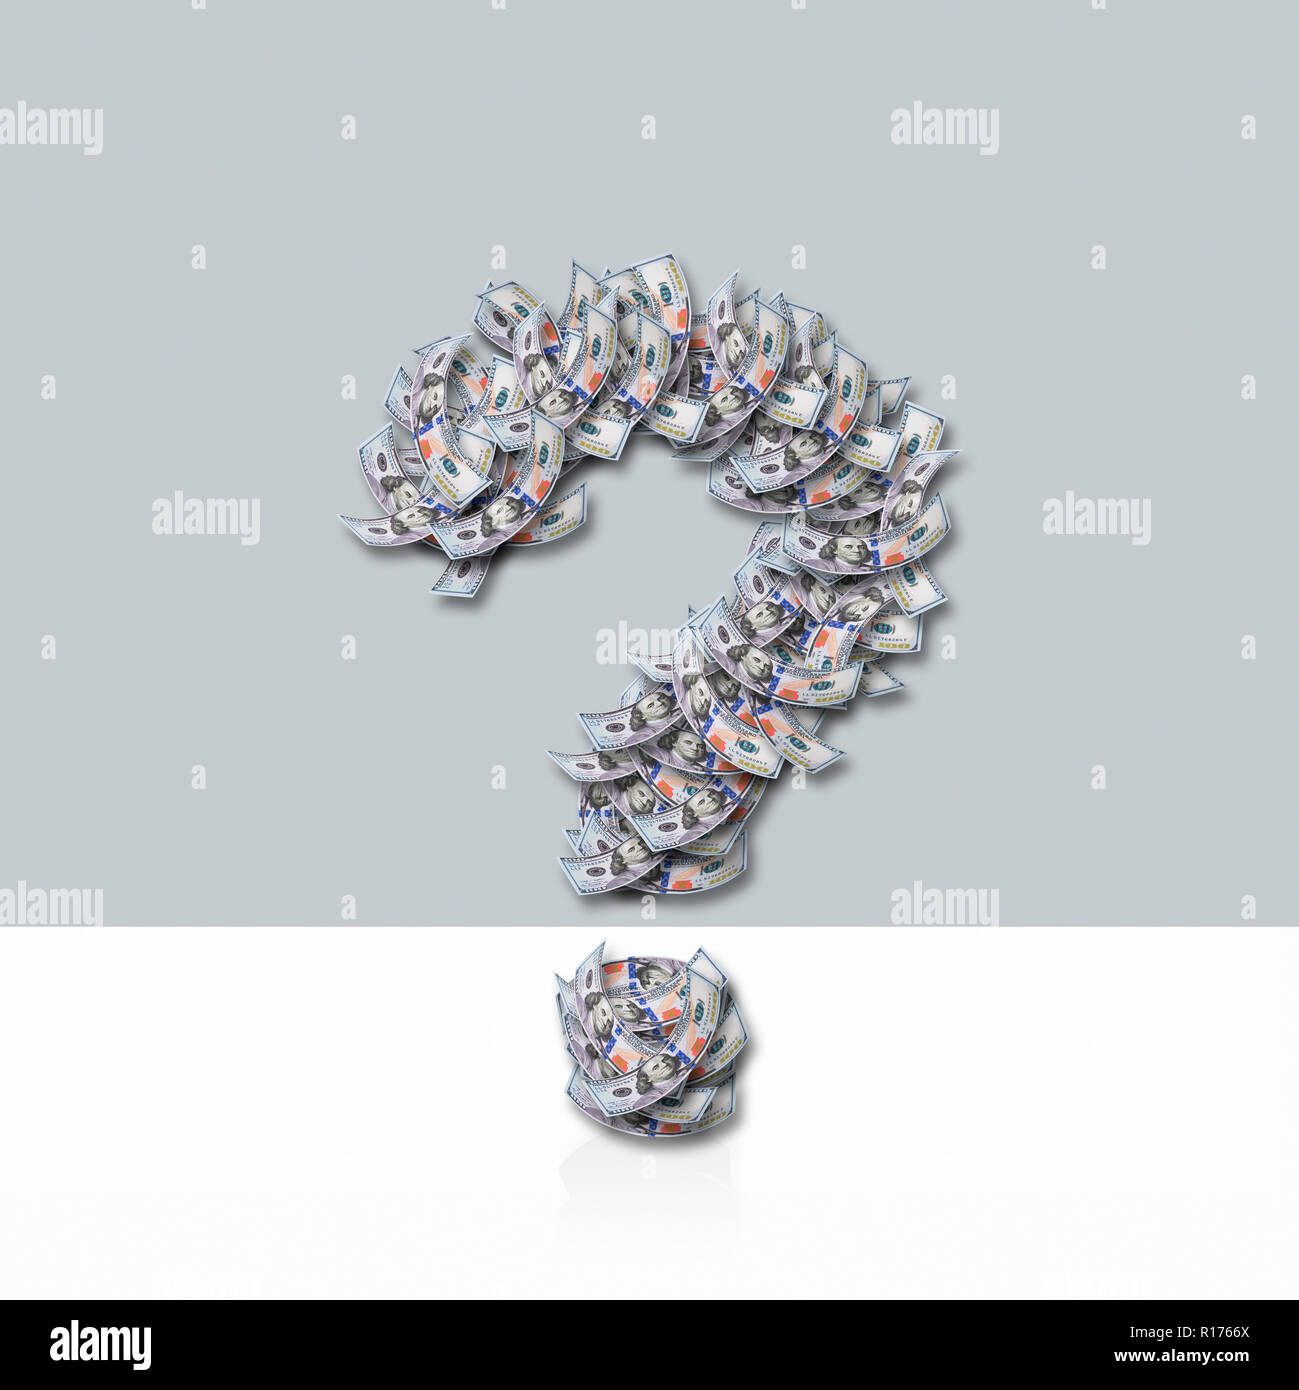 US dollar notes in shape of question mark, grey background Stock Photo